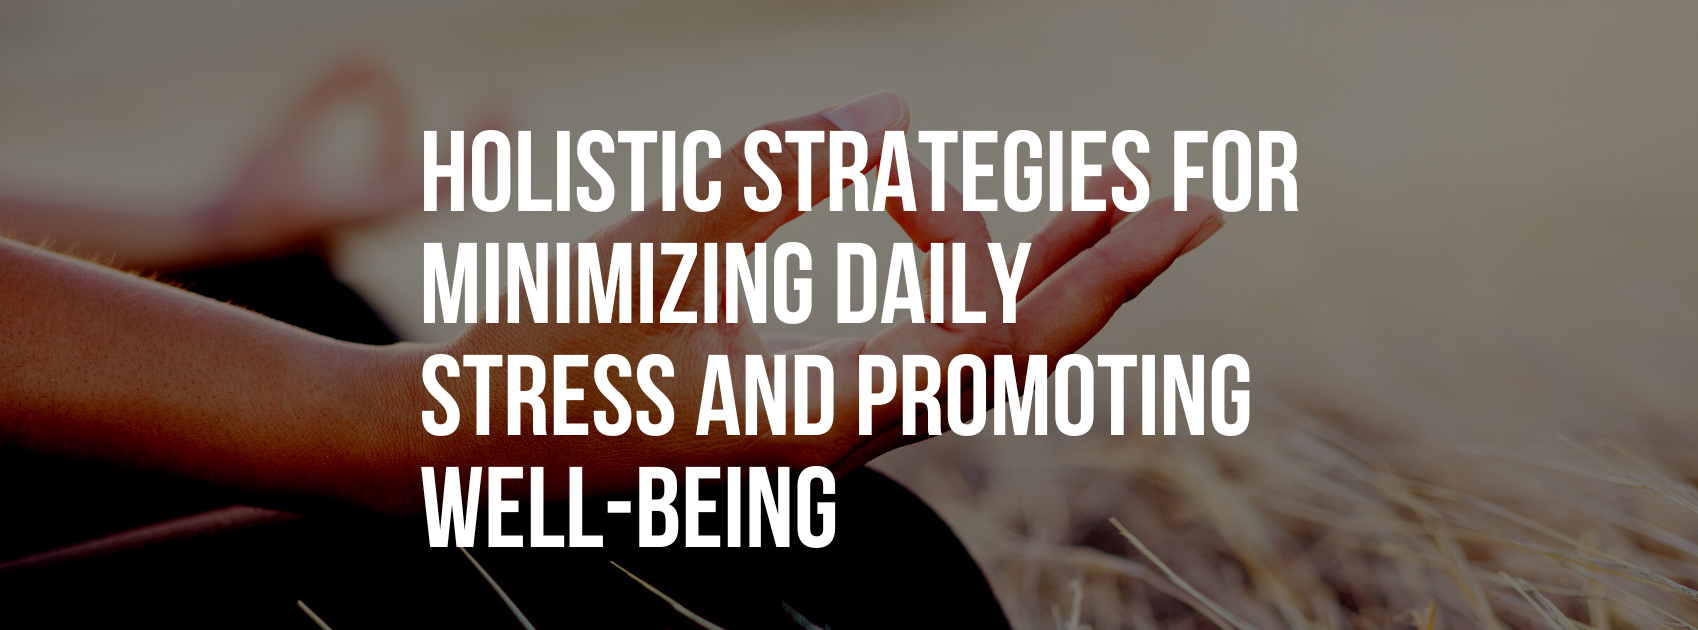 Holistic Strategies for Minimizing Daily Stress and Promoting Well-Being